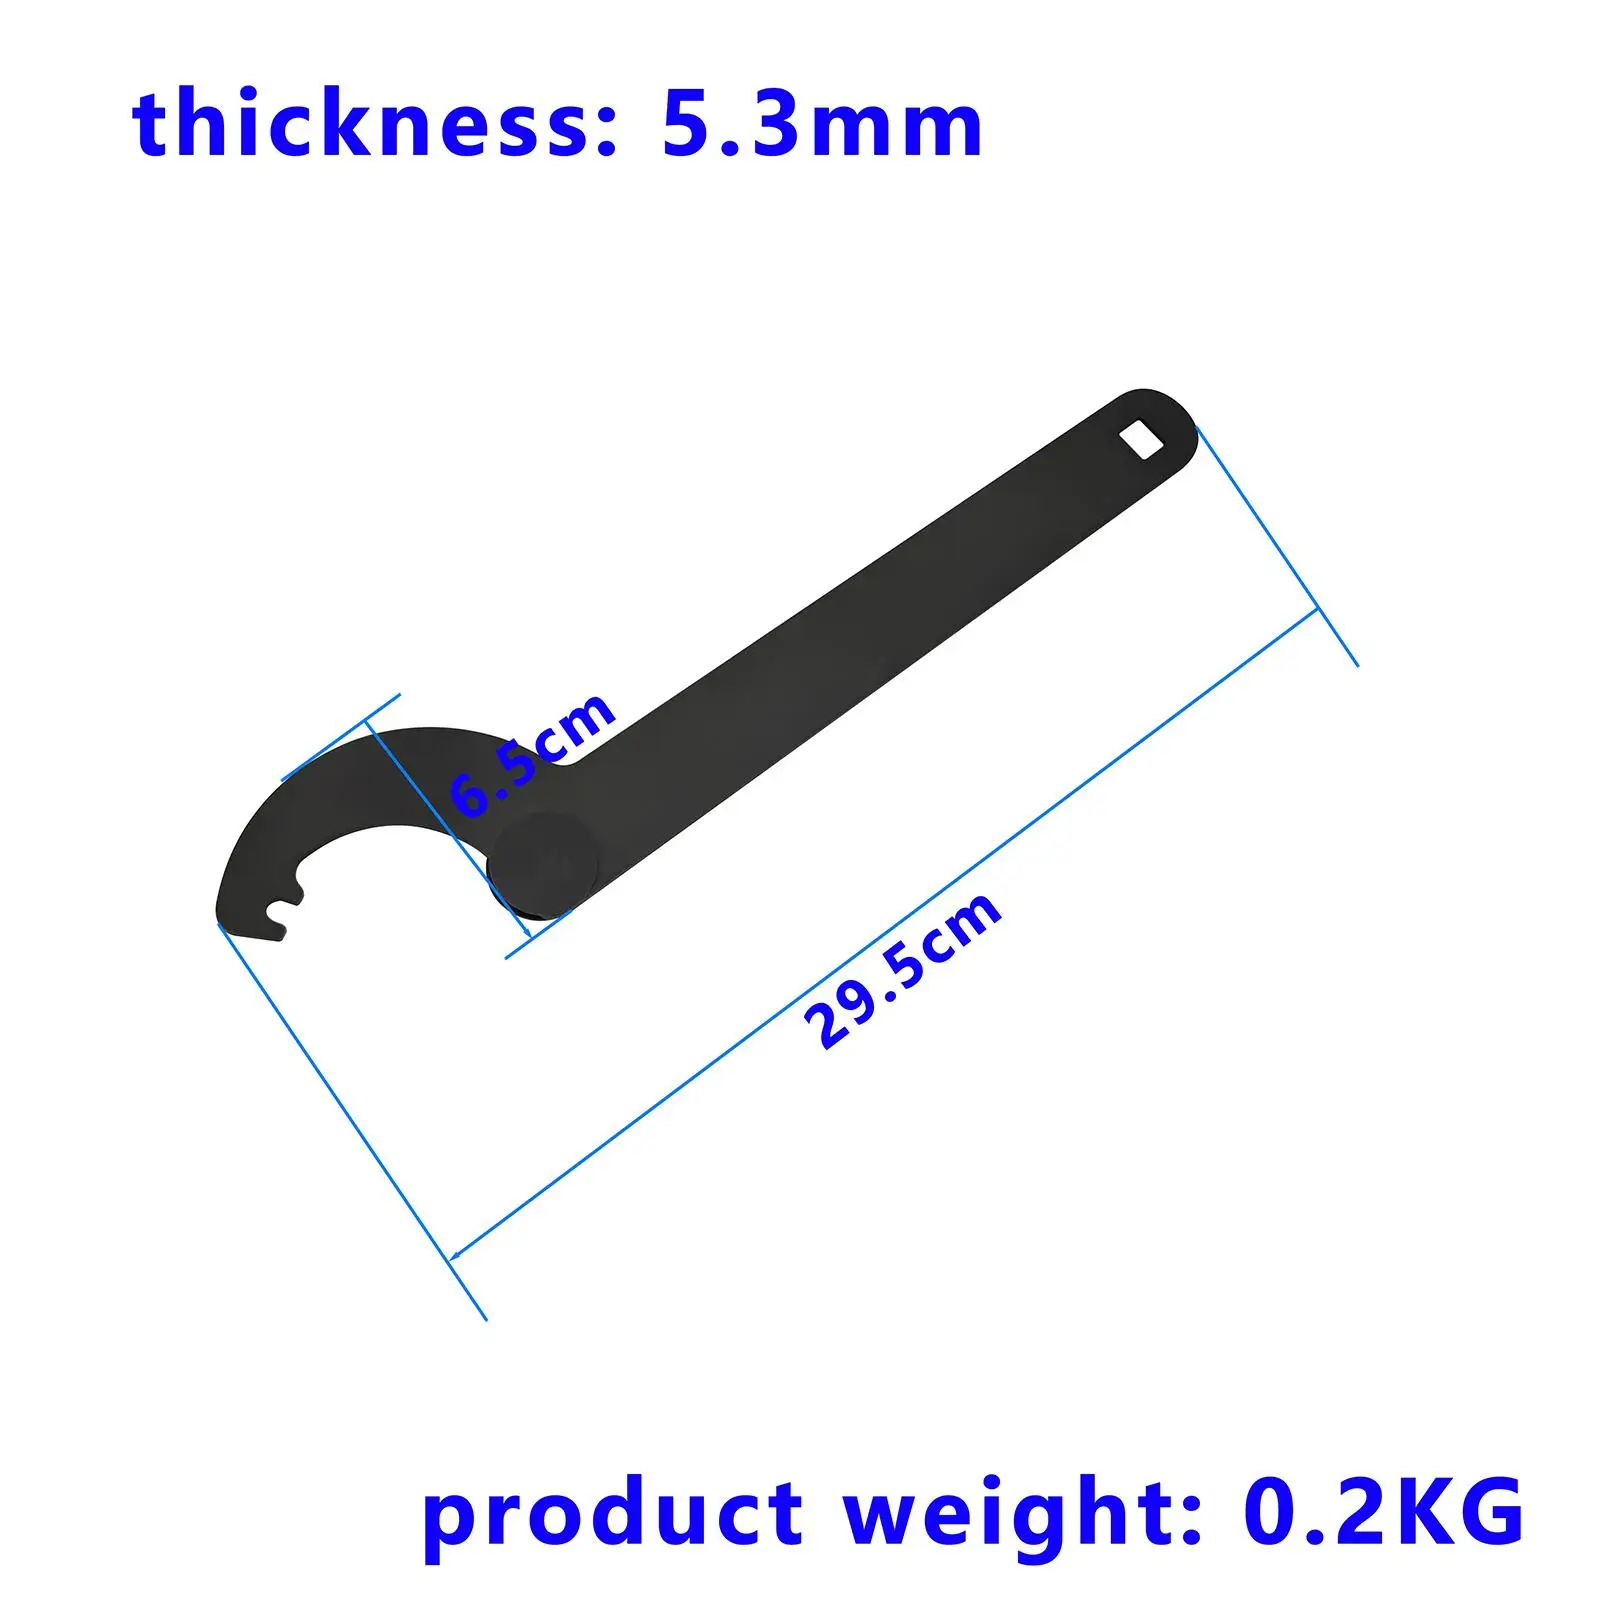 Car Window Removal Tool Wrench High Performance Metal Generator Retaining Nut